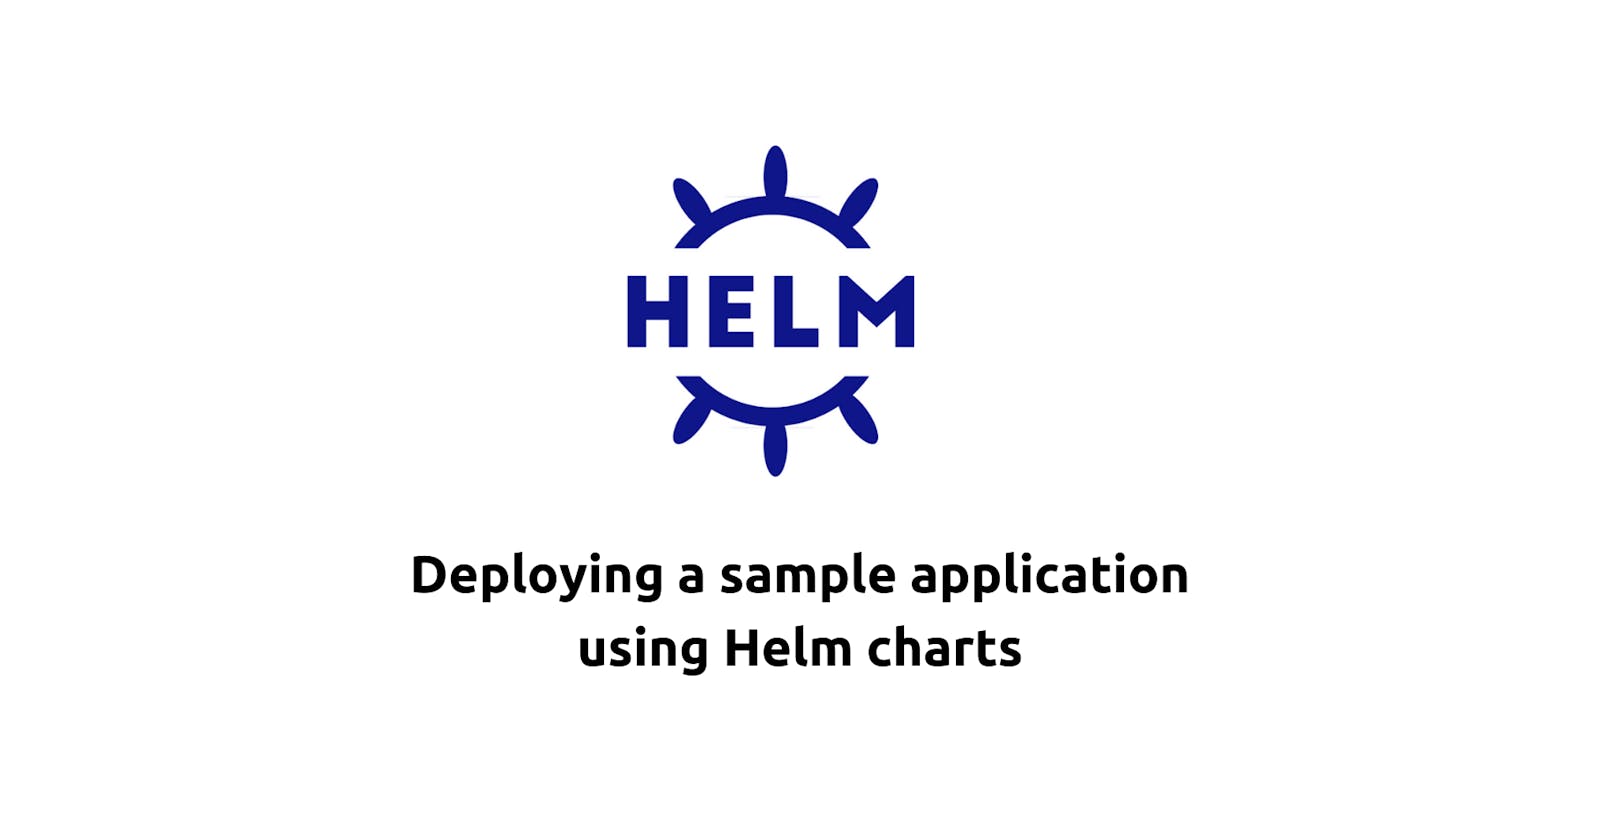 Deploying a sample application using Helm charts